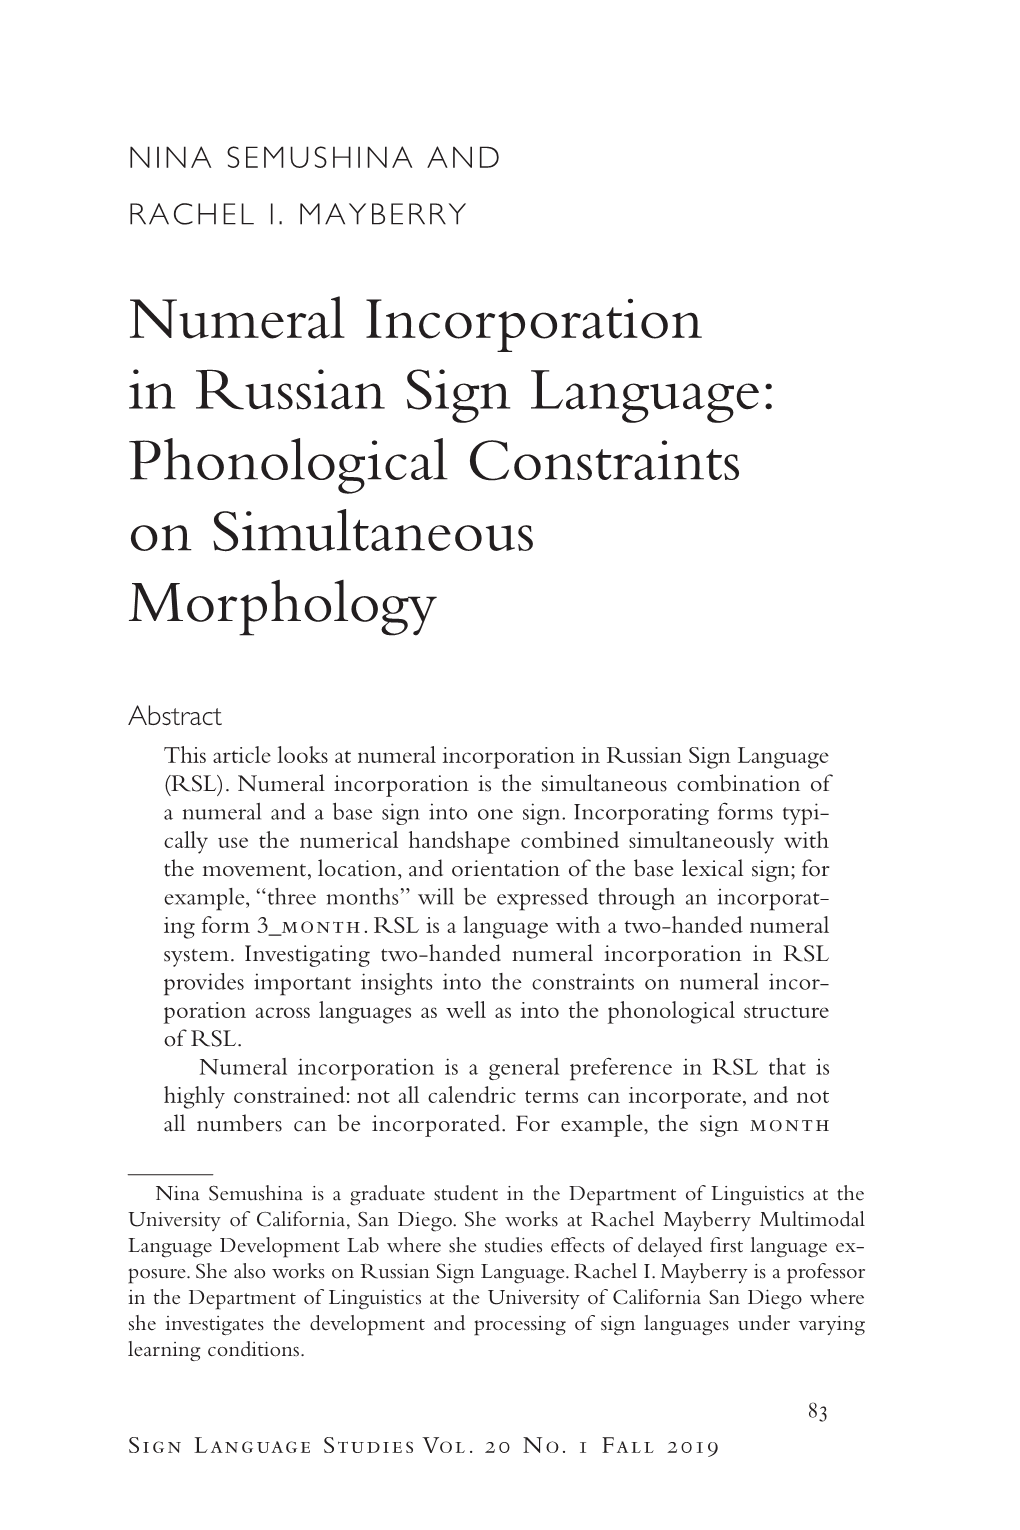 Numeral Incorporation in Russian Sign Language: Phonological Constraints on Simultaneous Morphology